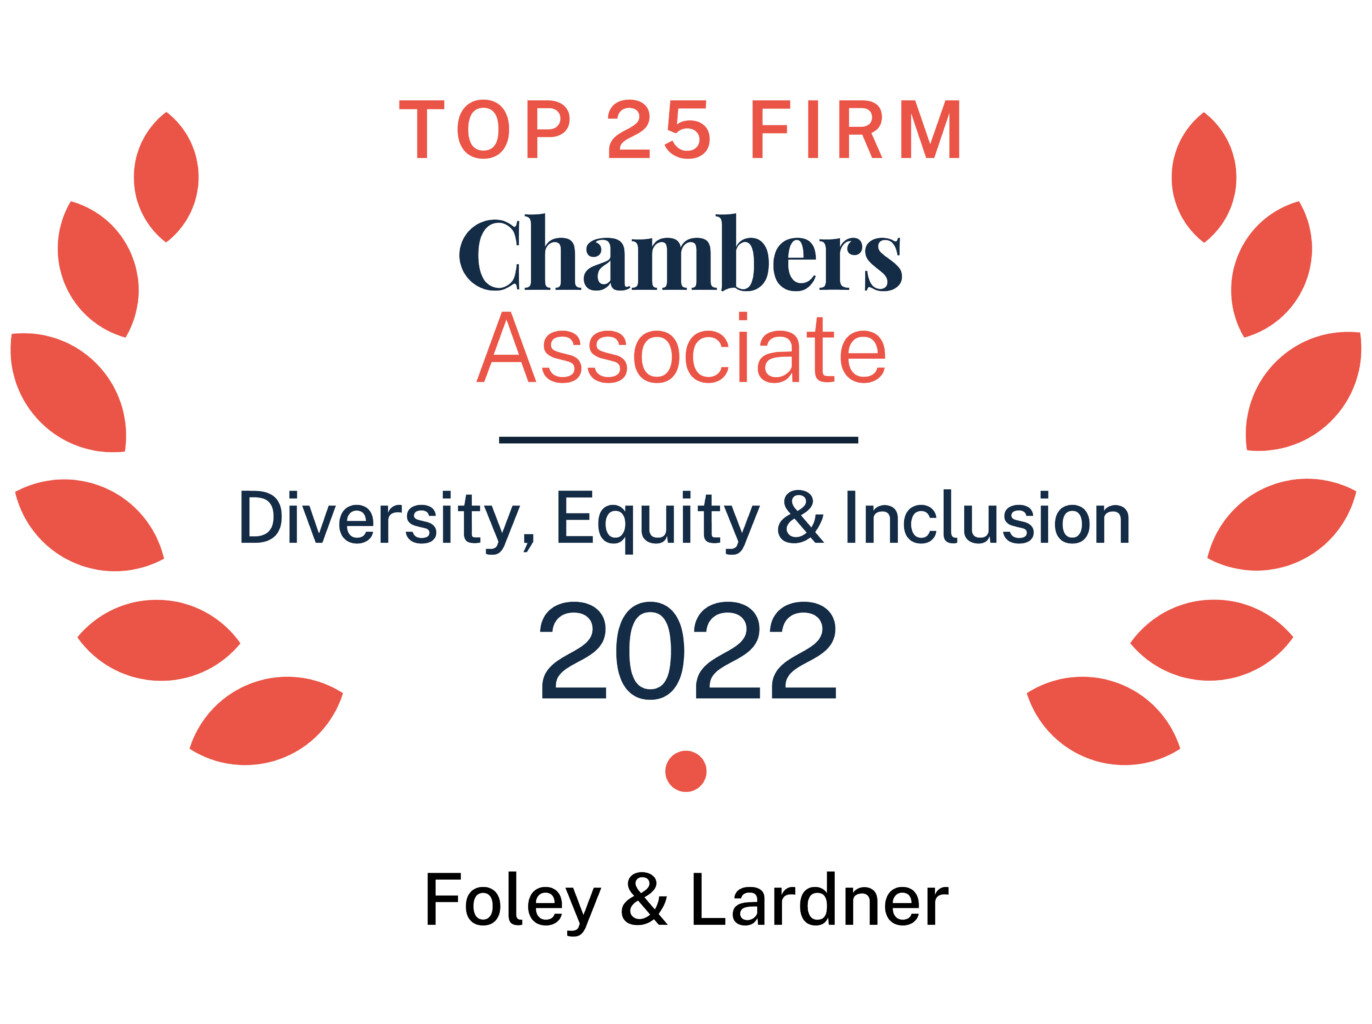 Chambers Award for Diversity, Equity & Inclusion